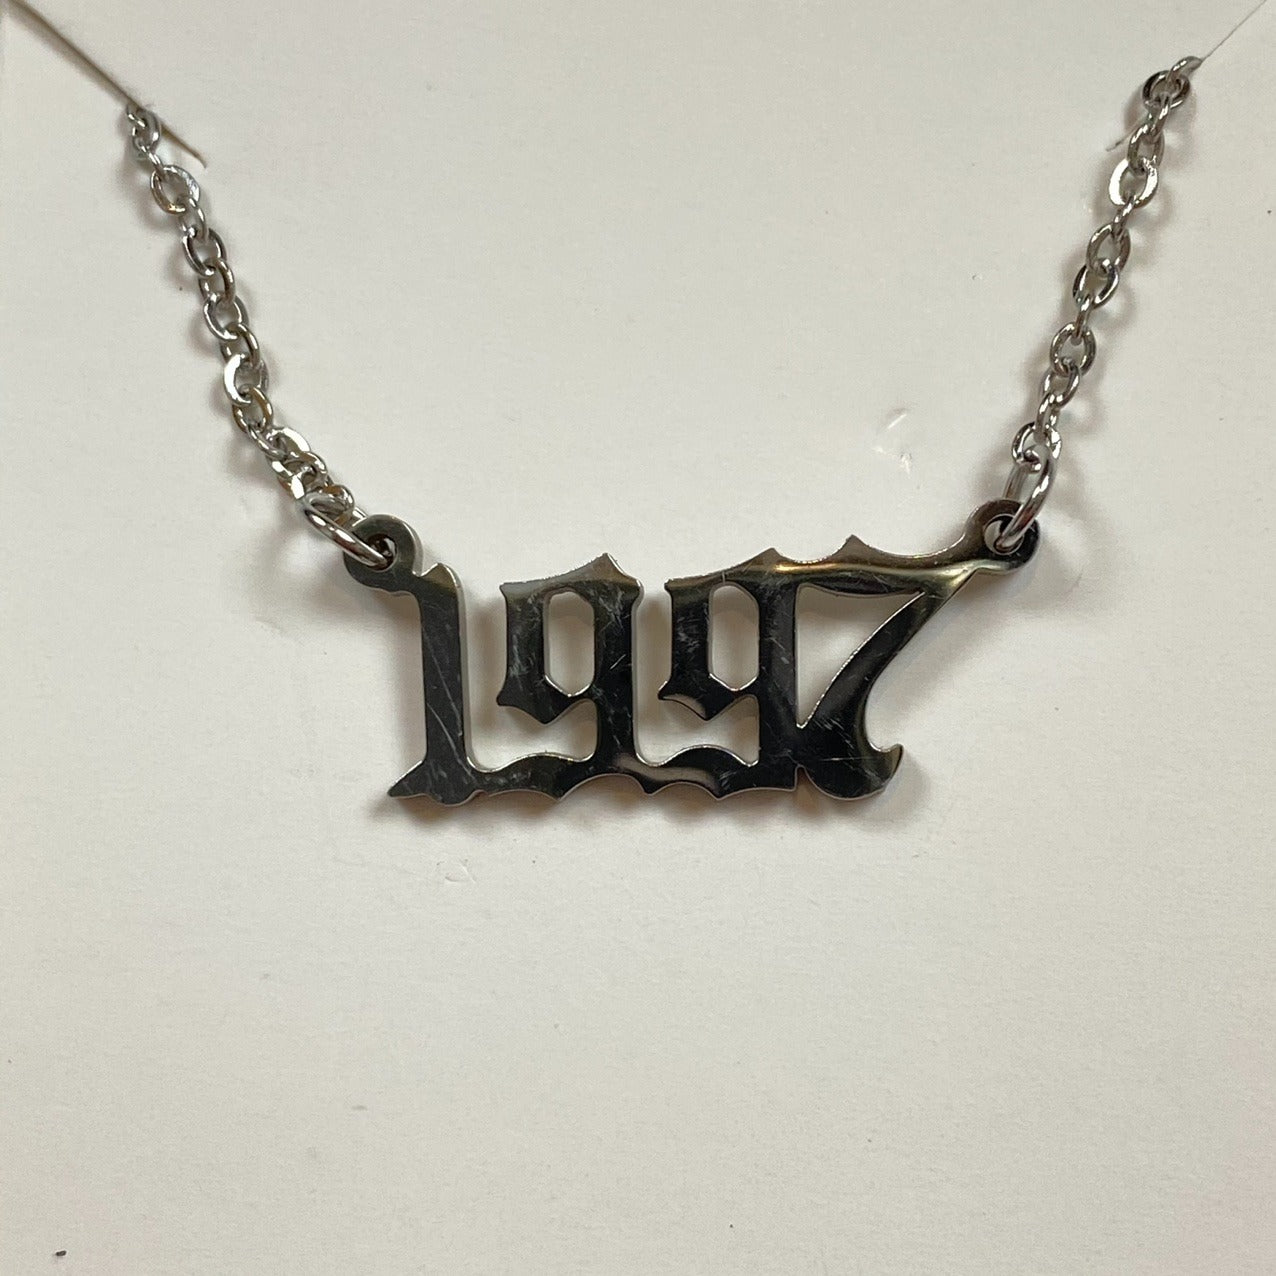 1997 Birth Year Necklace Chain Silver